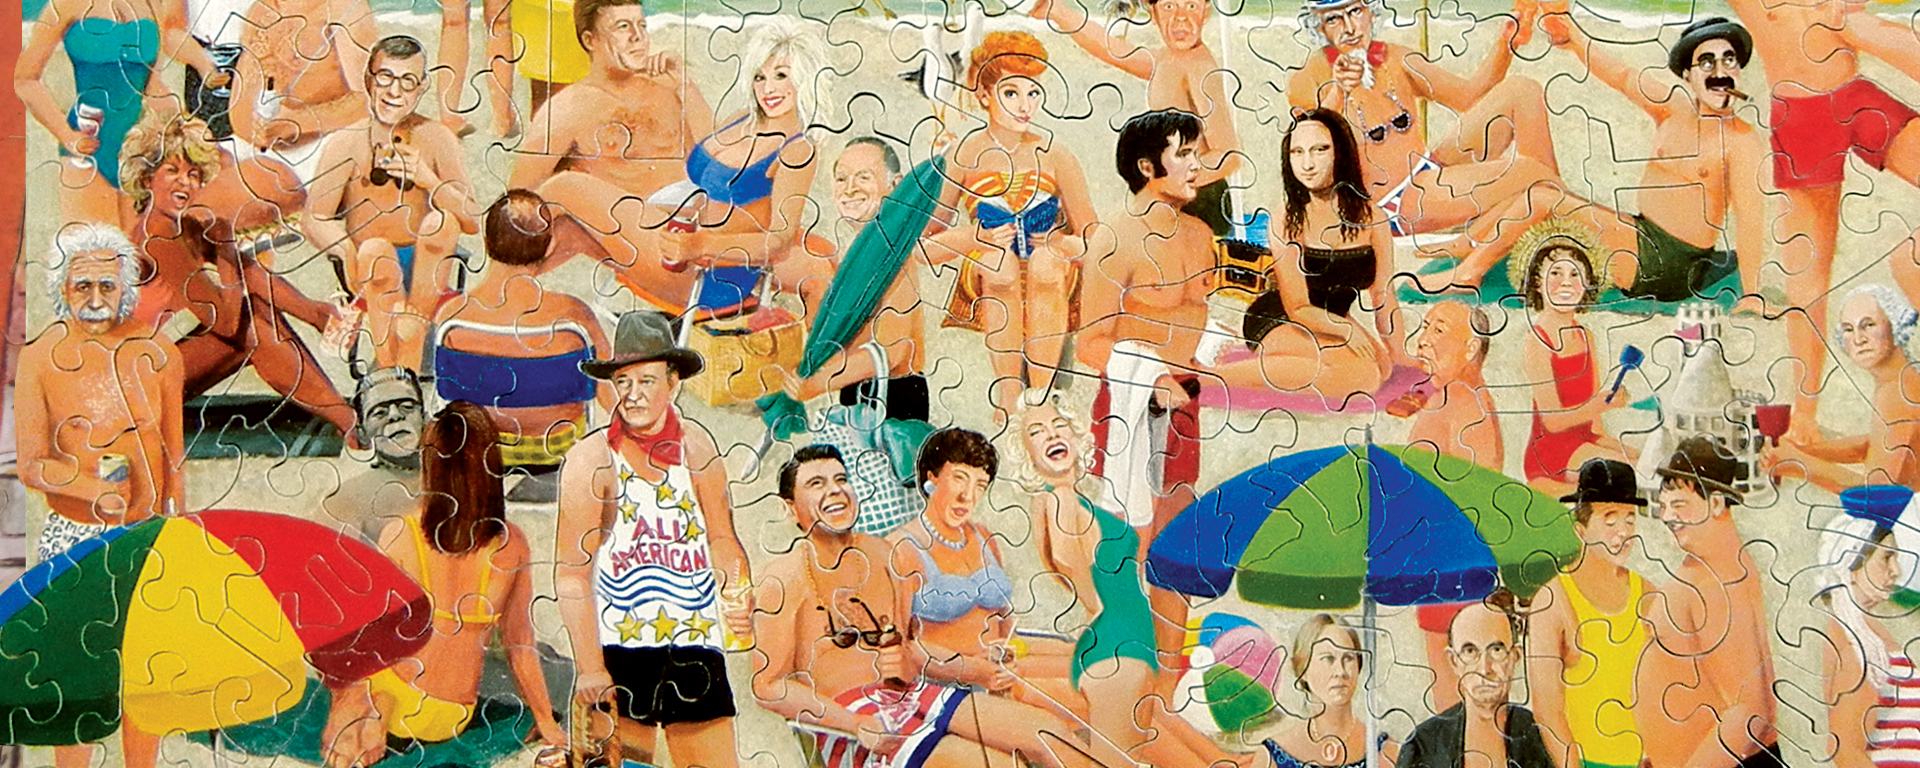 Wooden jigsaw puzzle depicting a variety of famous people at the beach together such as Albert Einstein, Dolly Parton, Elvis, the Mona Lisa, George Washington, and more.